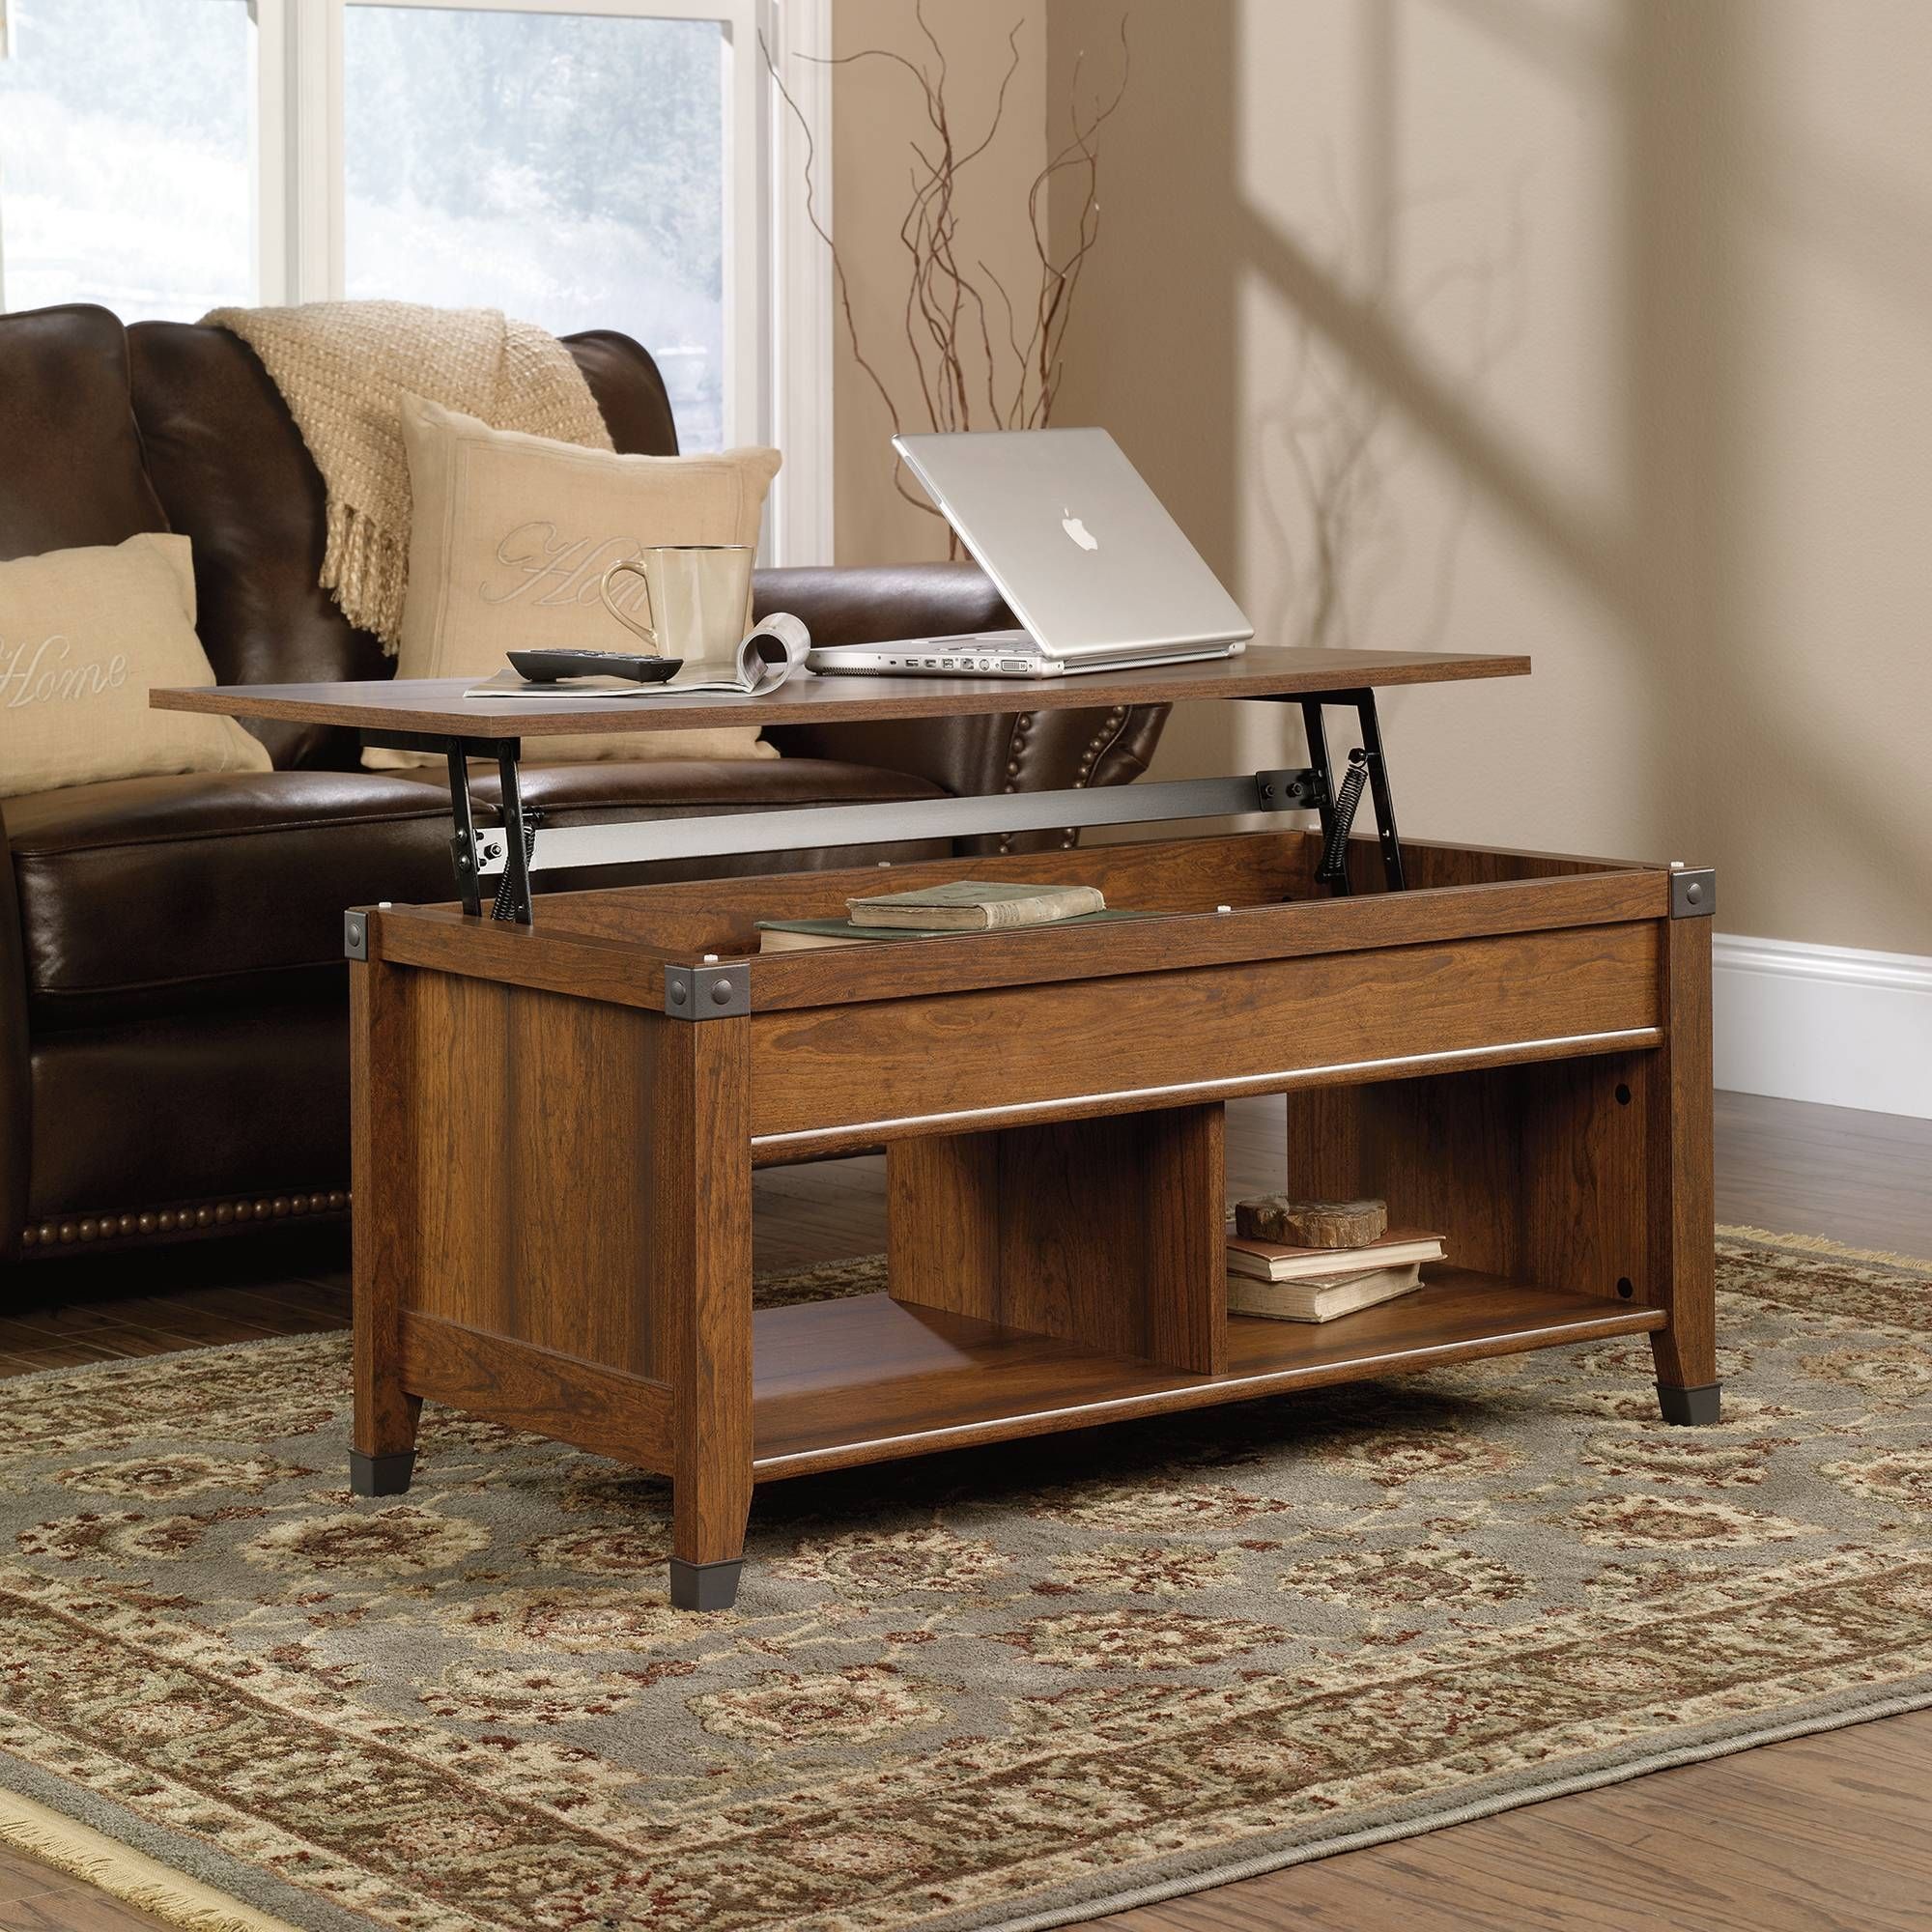 Carson Forge | Lift Top Coffee Table | 414444 | Sauder For Logan Lift Top Coffee Tables (View 17 of 30)